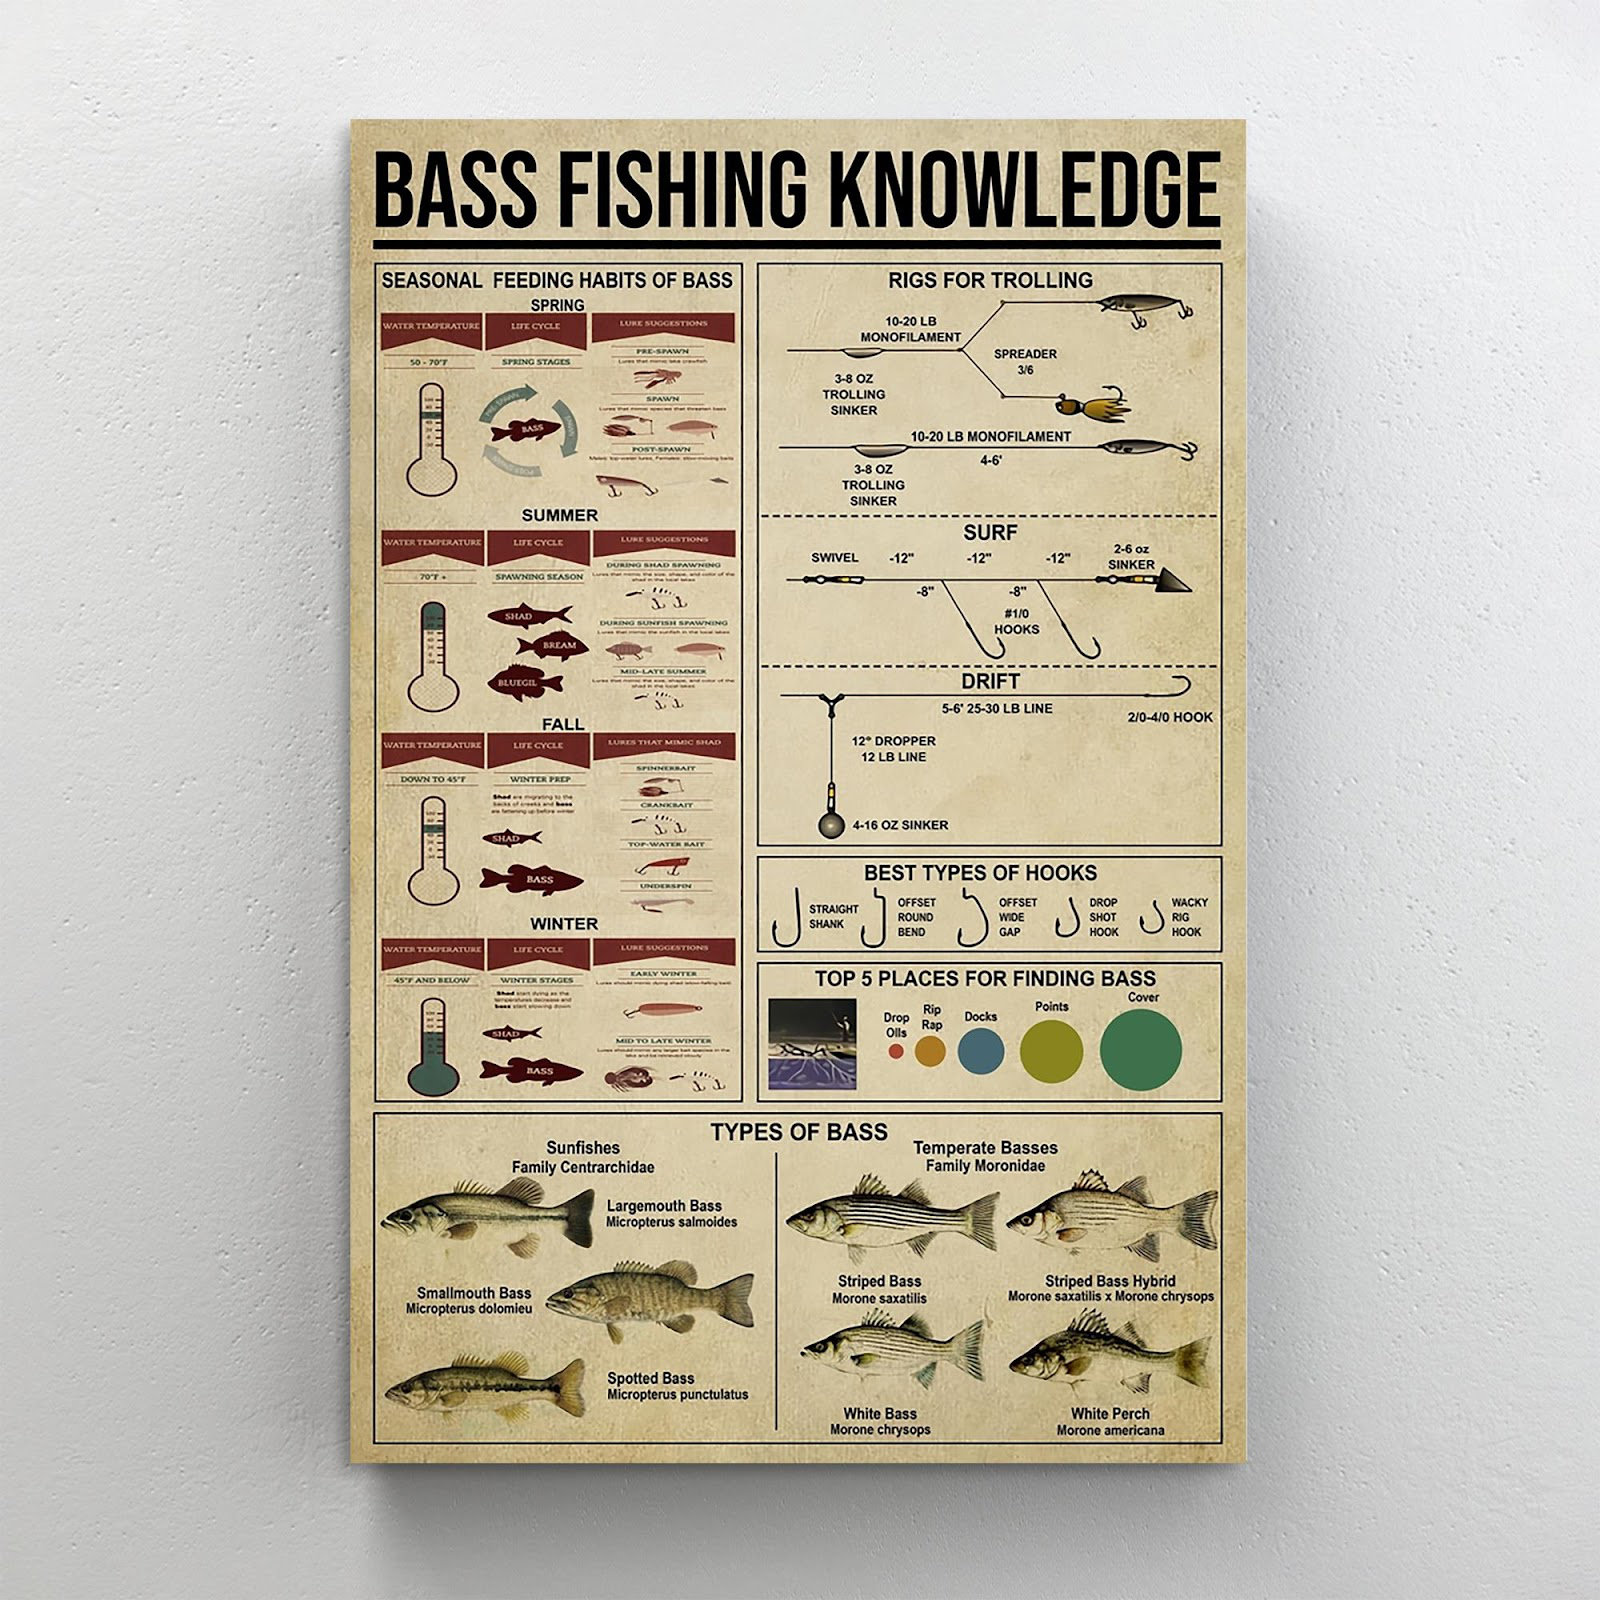 Bass Fishing Knowledge - Wrapped Canvas Textual Art Trinx Size: 14 H x 11 W x 1.25 D